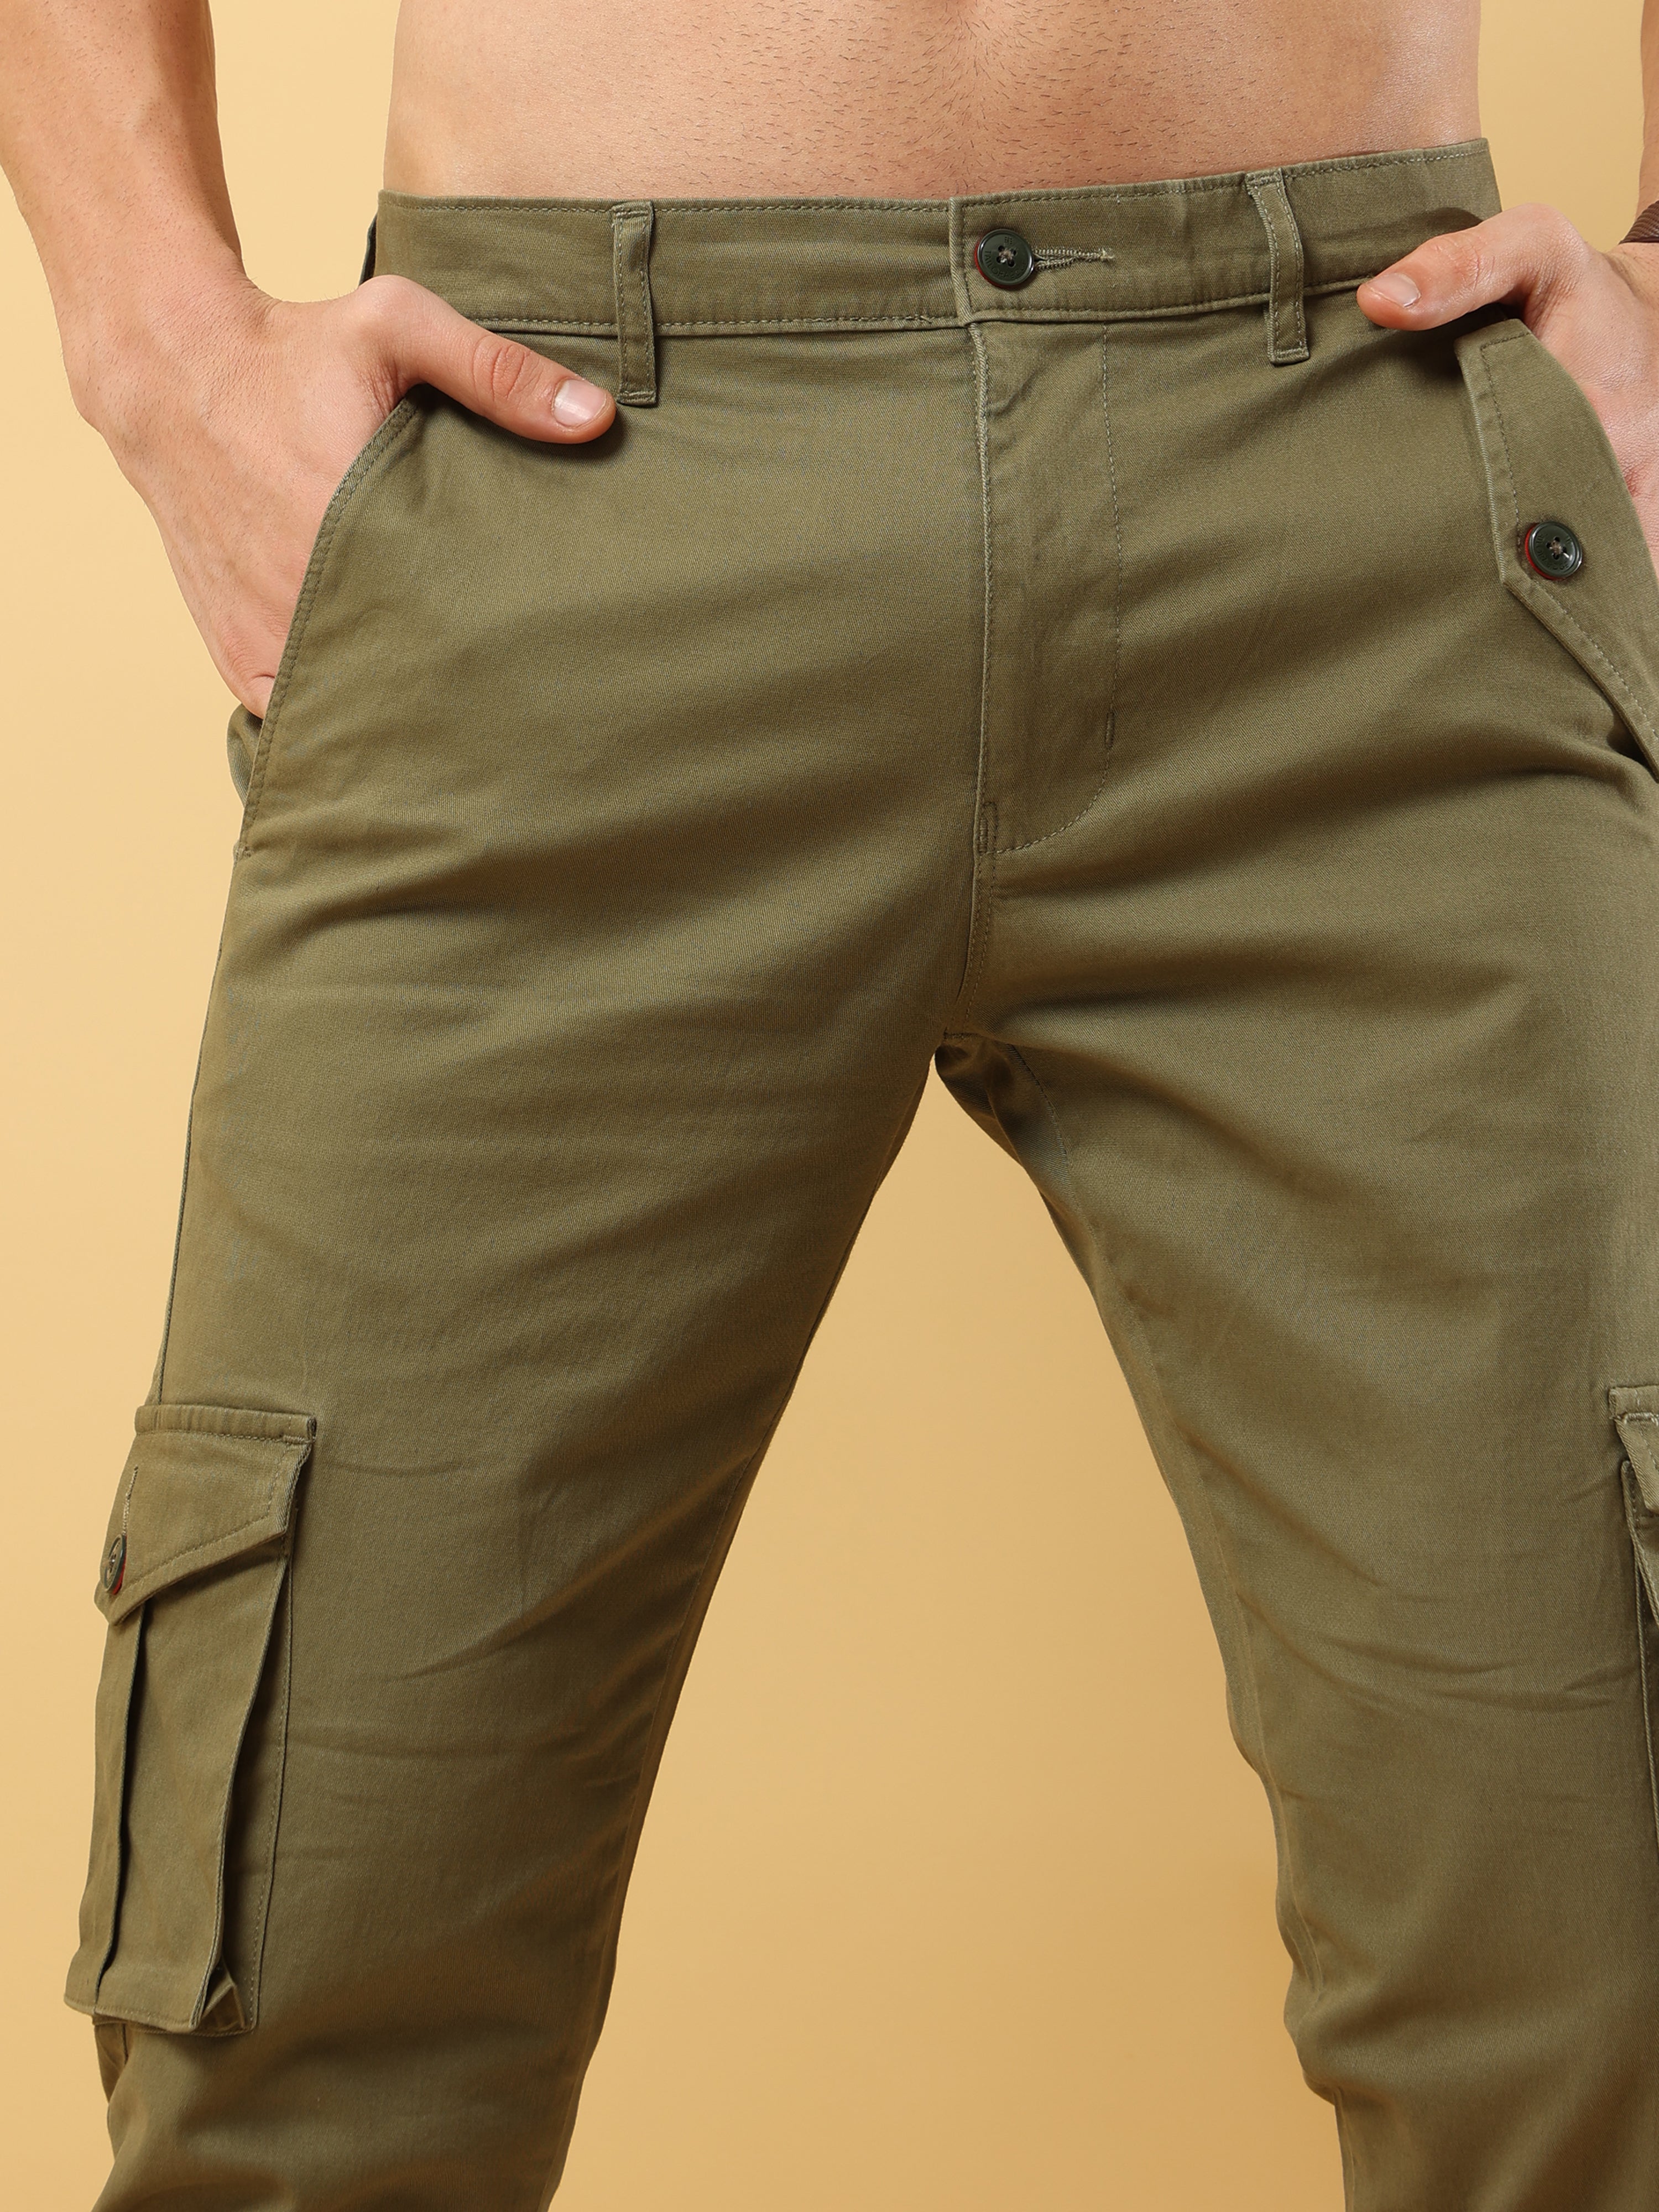 Wrinkle-Free Grey Chinos - No Iron Needed | Bluffworks